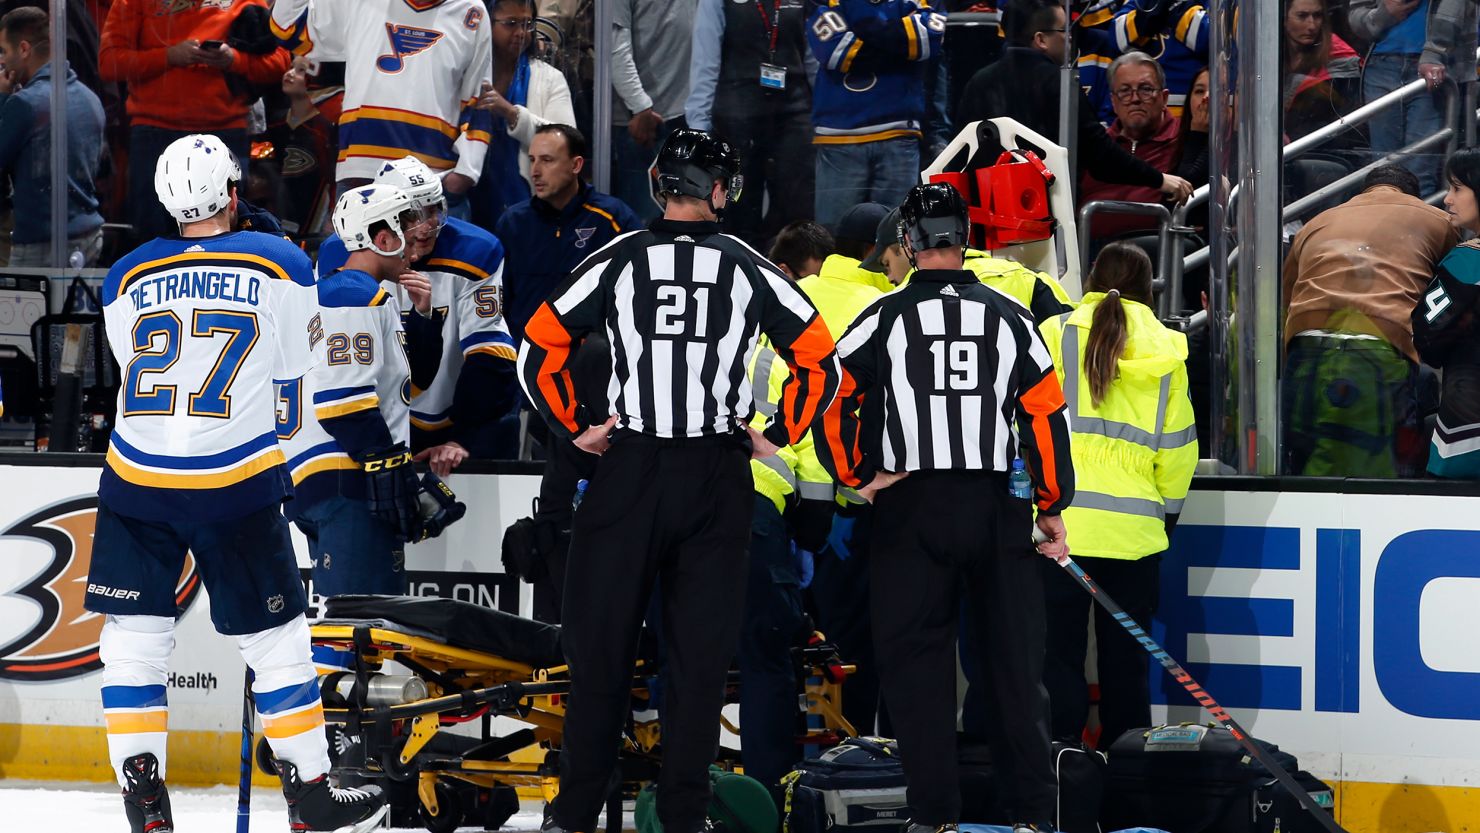 The St. Louis Blues watch as the paramedics treat Jay Bouwmeester after he collapsed during a game against the Anaheim Ducks